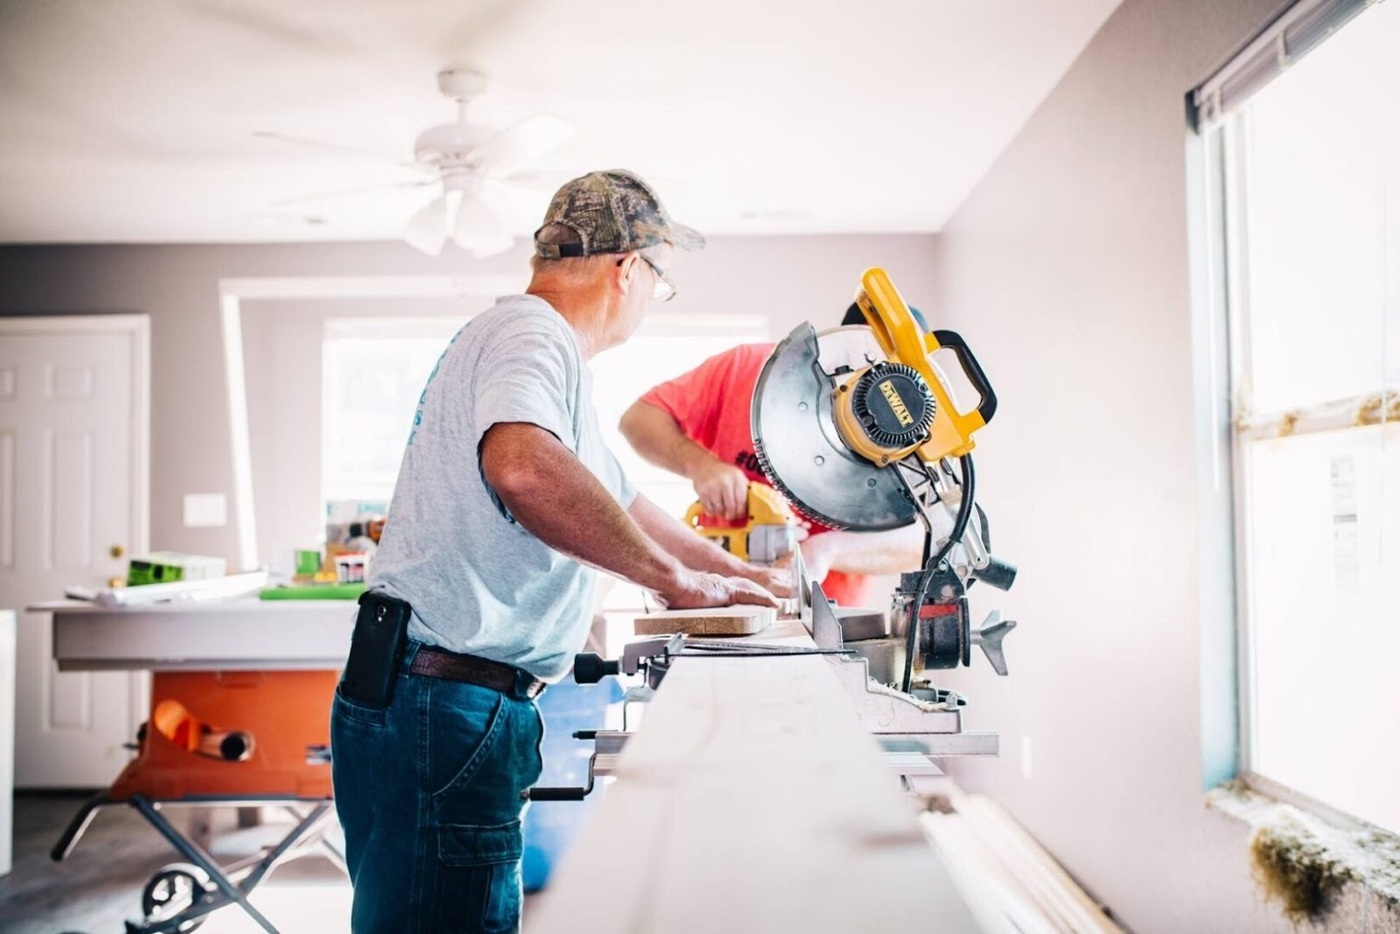 1 Stop Handyman has been offering handyman services, home remodeling, and home renovations for over 15 years now.